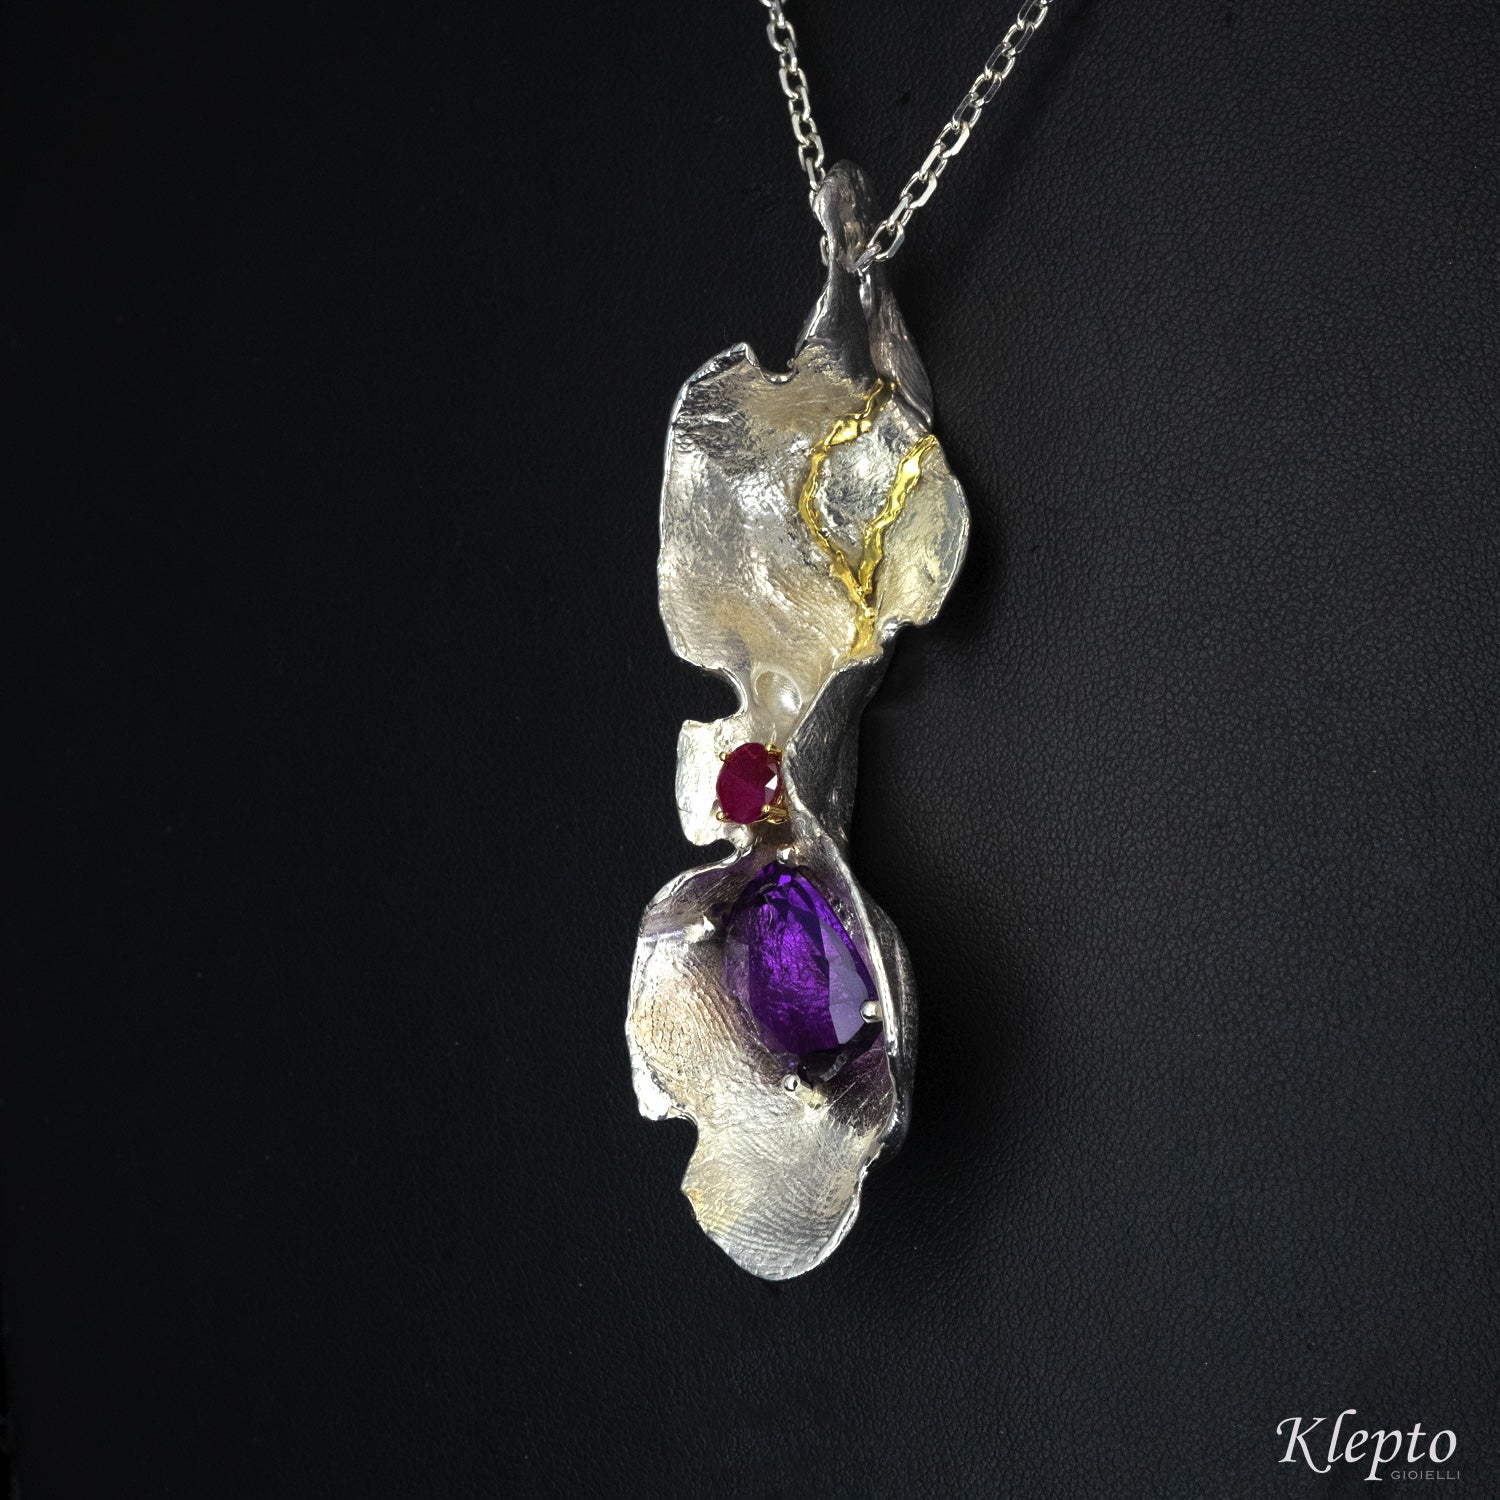 Pendant in Silnova® Silver with Amethyst, Ruby and yellow gold details